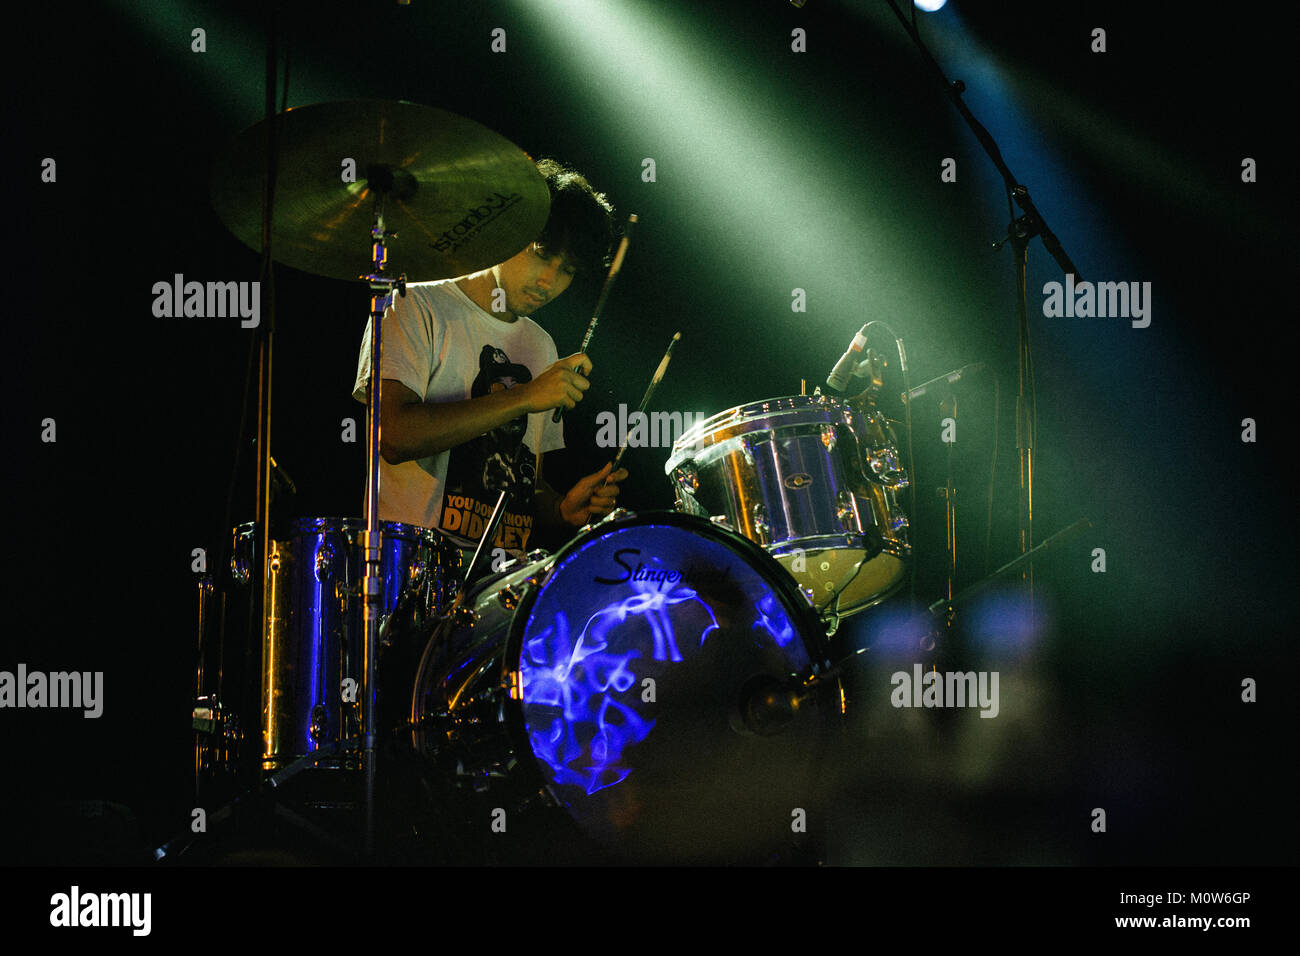 The American indie rock band Deerhunter performs a live concert at the Arena Stage at Roskilde Festival 2014. Here drummer Moses Archuleta is pictured live on stage. Denmark 06.07.2014. Stock Photo